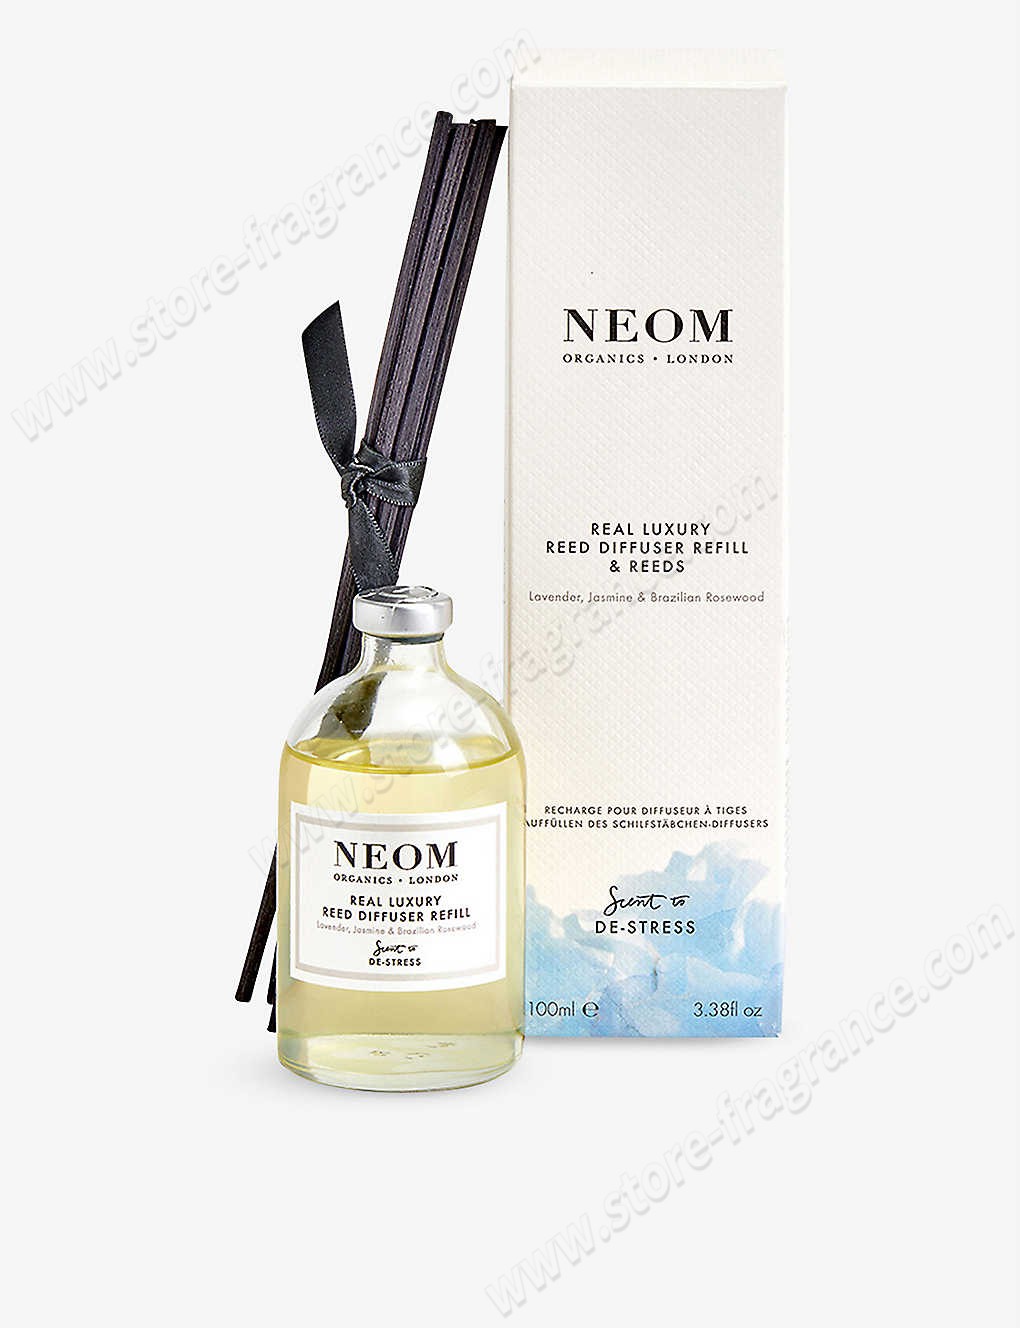 NEOM/Real luxury reed diffuser refill 100ml ✿ Discount Store - -1